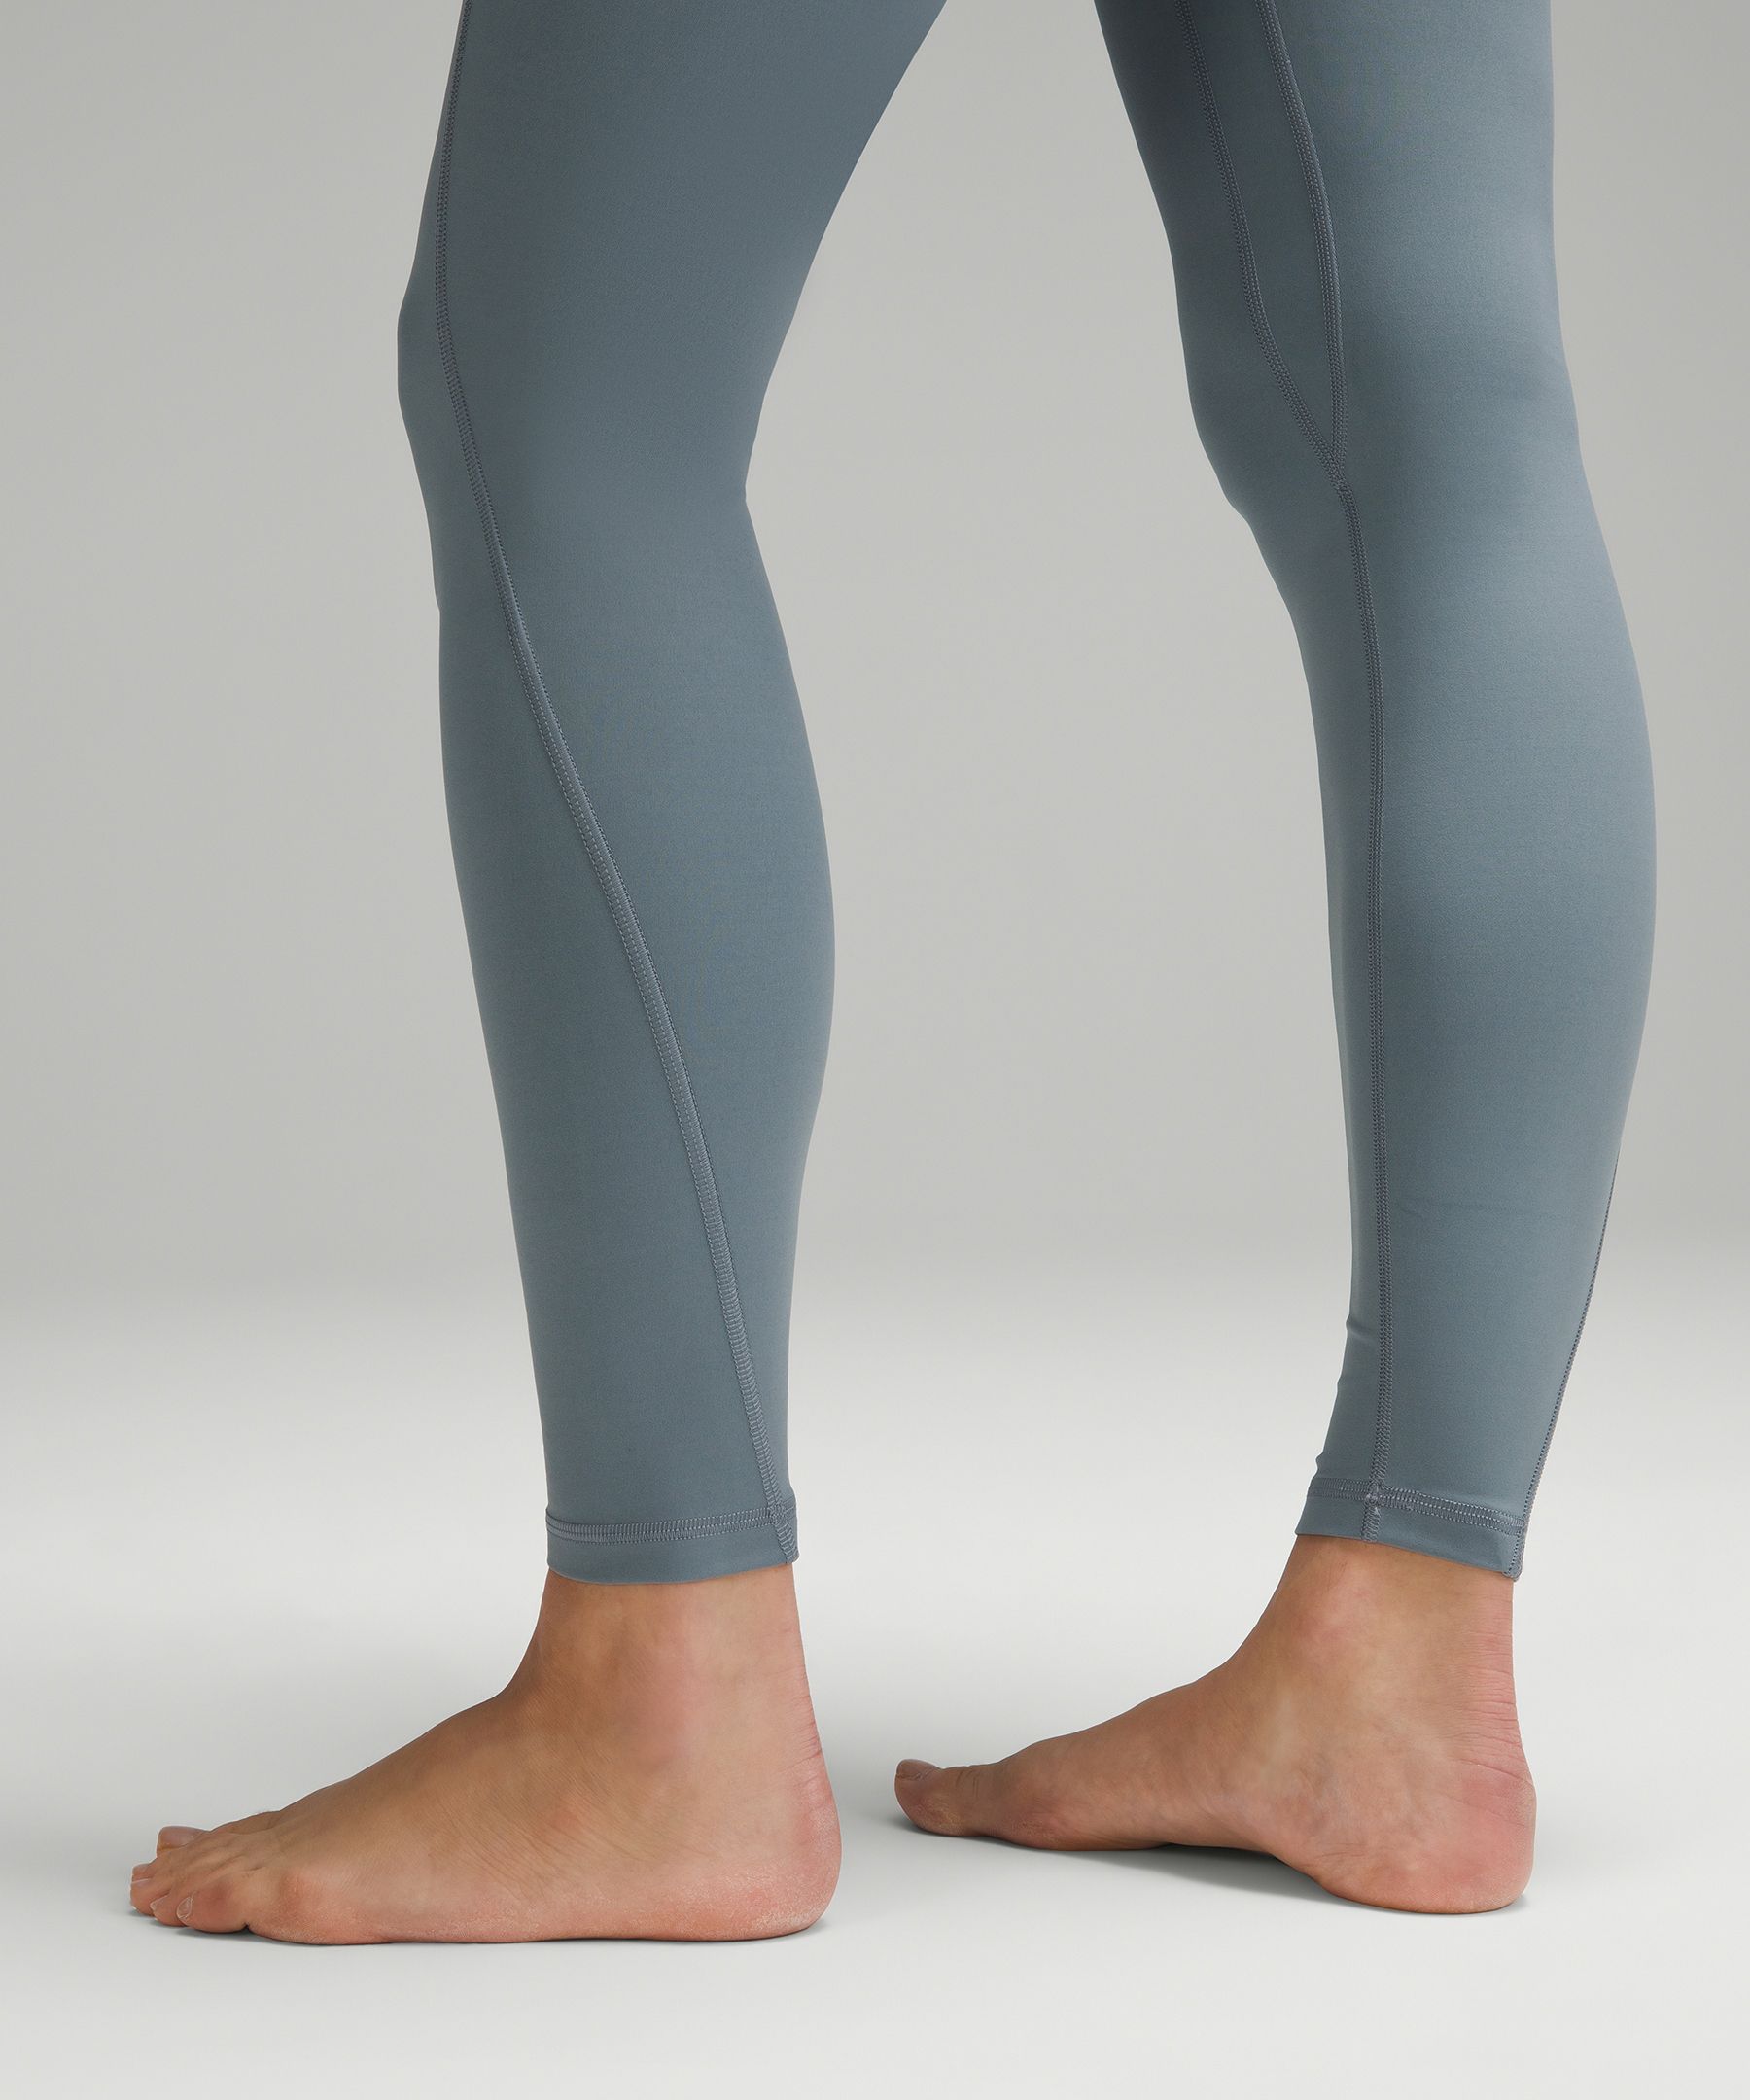 Lululemon Leggings Black With Pockets Size 6 - $40 (68% Off Retail) - From  Bailee